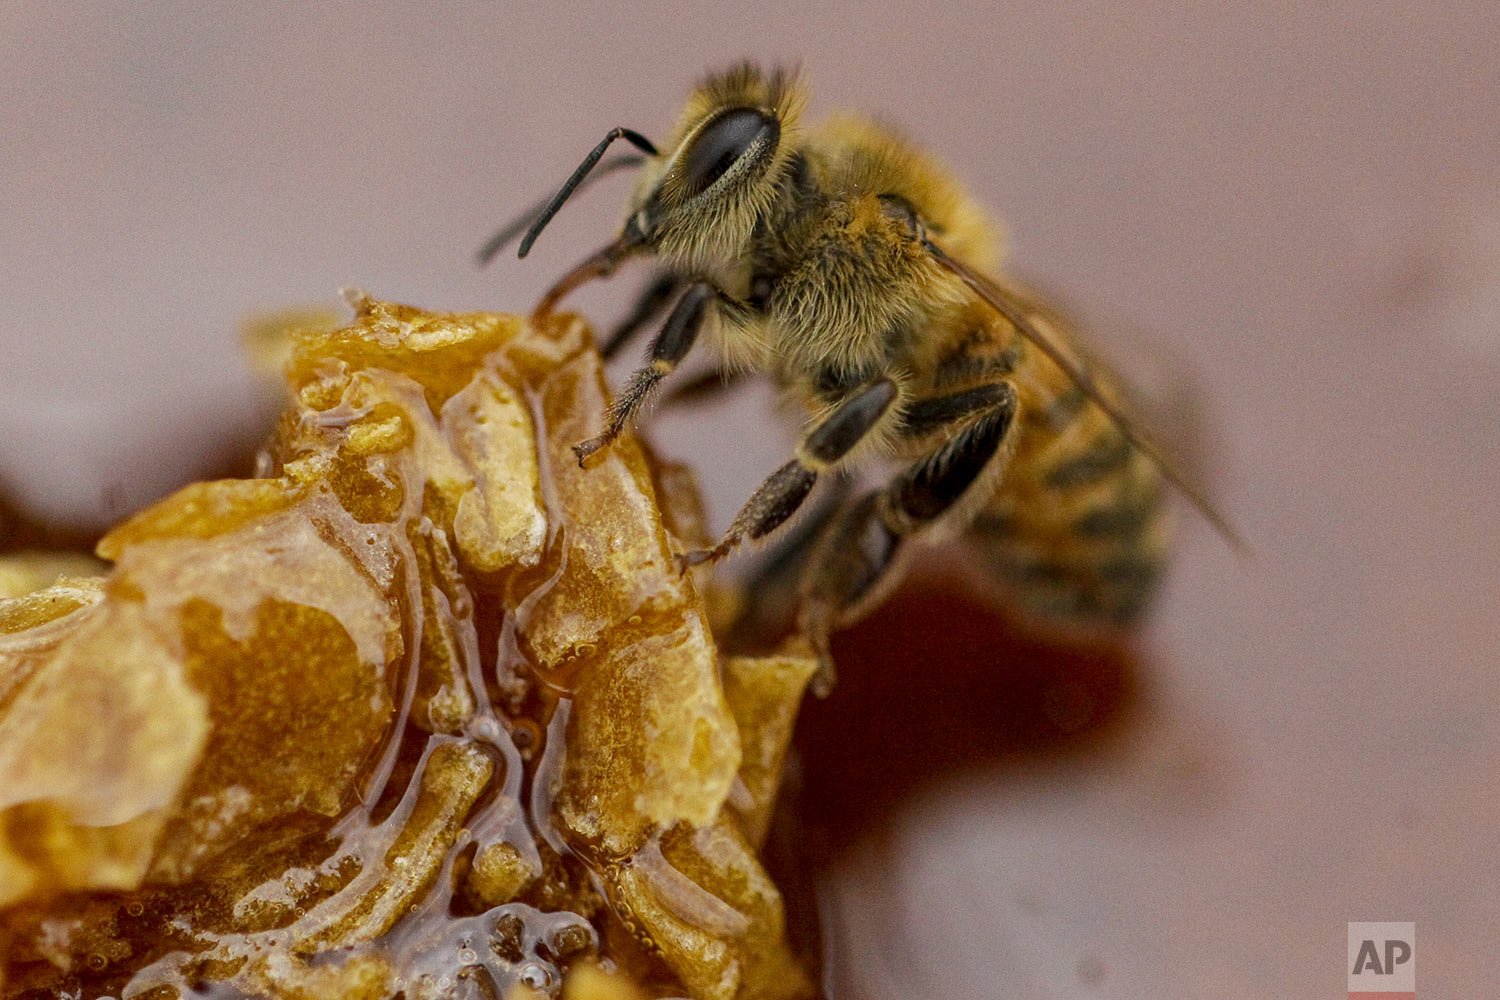  A bee feeds on a honeycomb at a beekeeper's farm in Colina, on the outskirts of Santiago, Chile, Jan. 17, 2021. A drought has gripped Chile for 13 years and the flowers that feed honeybees in central Chile have grown increasingly scarce. (AP Photo/E